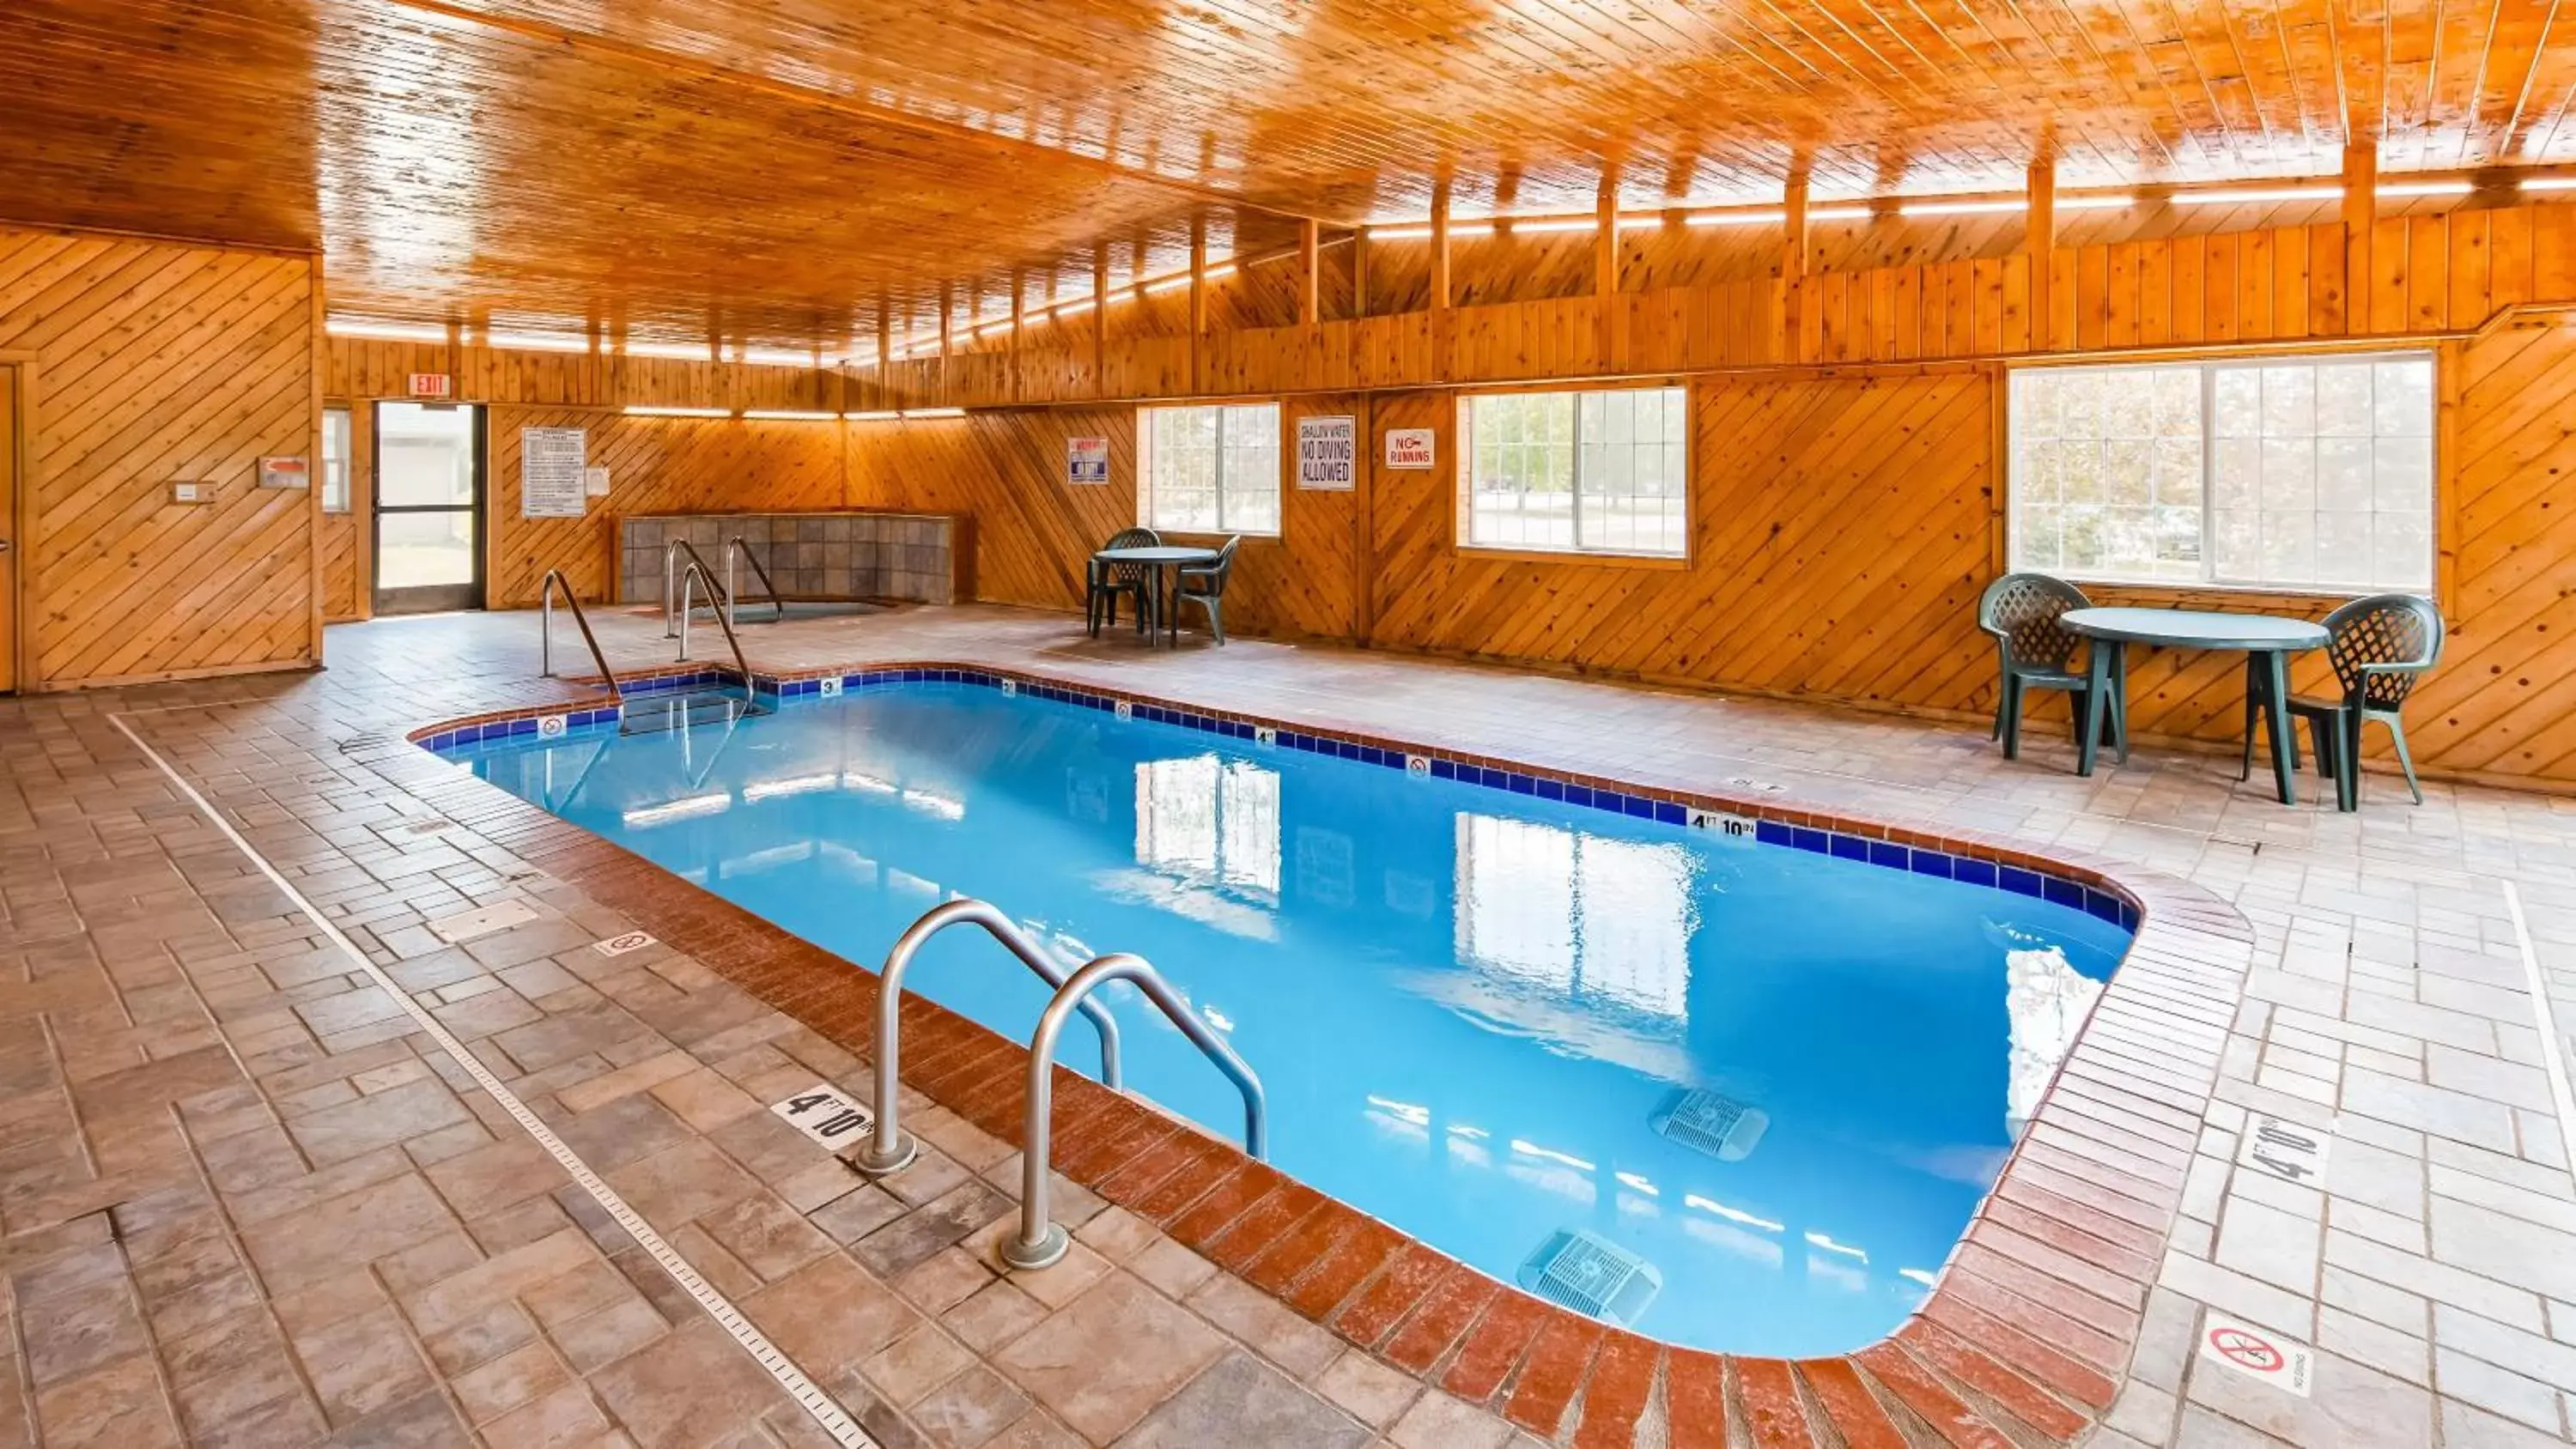 Swimming Pool in Super 8 by Wyndham Neillsville WI